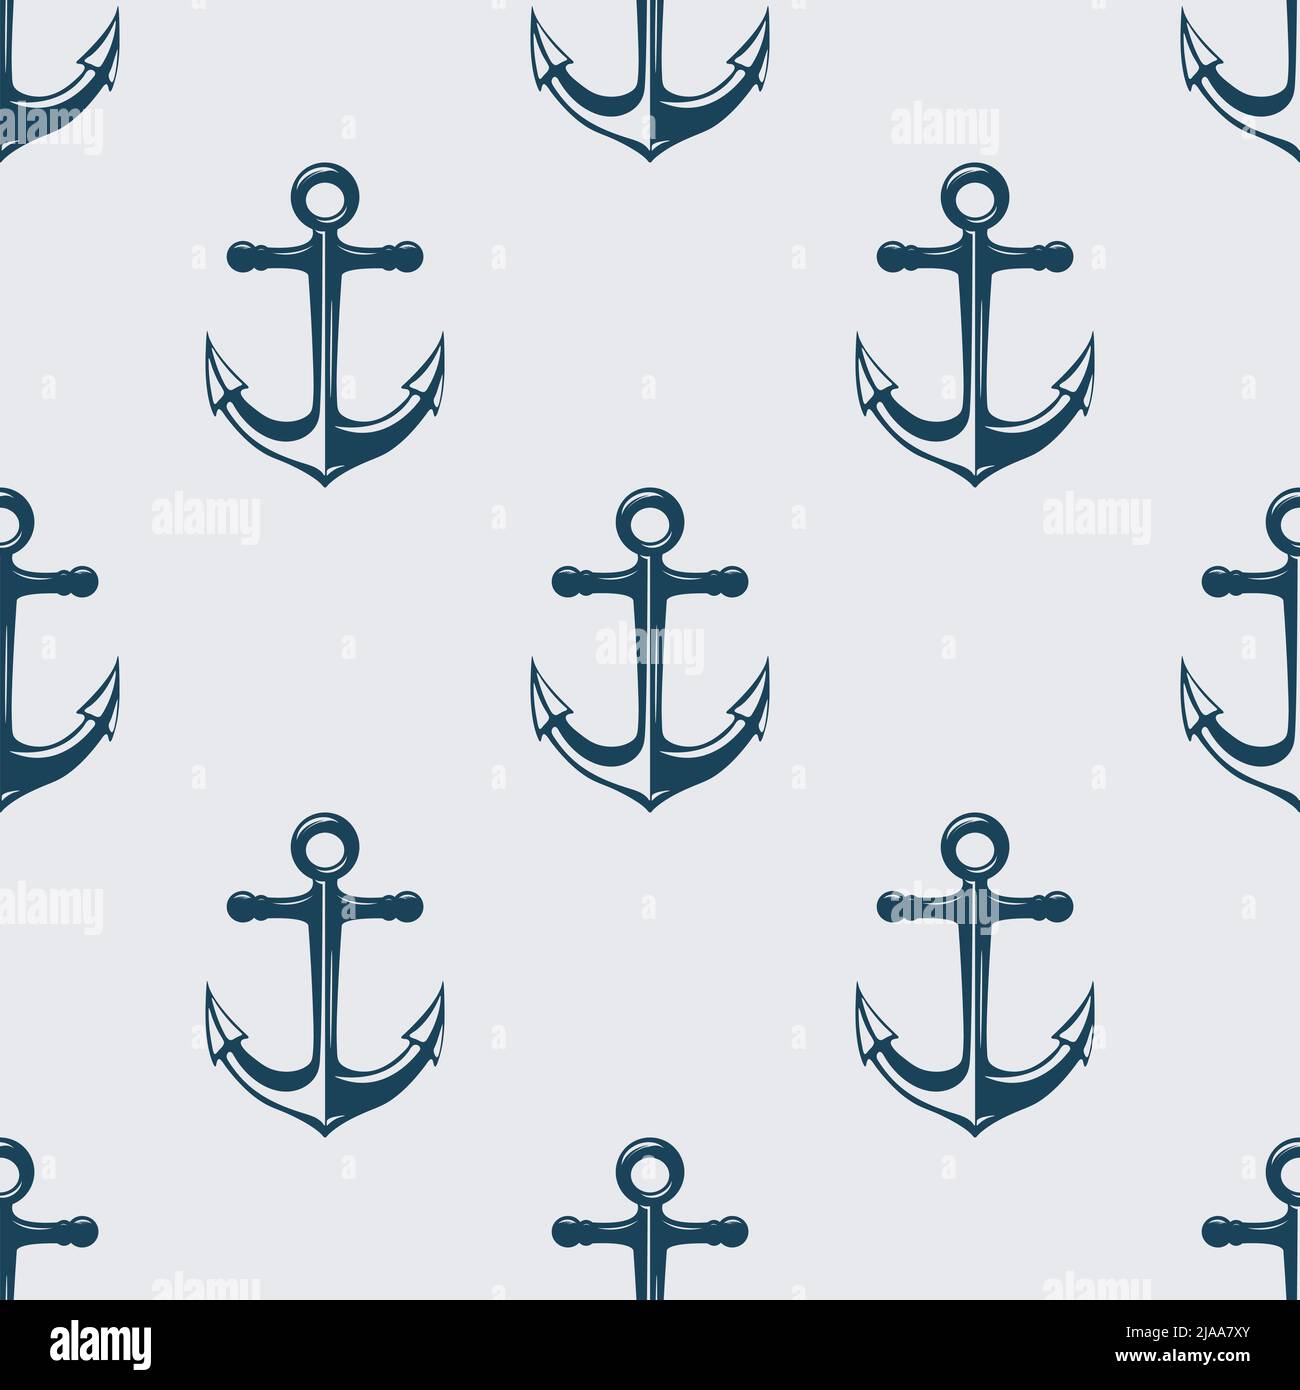 Vector Seamless Pattern with Hand drawn Anchor. Design Template for Textile, Apparel, Wallpapers. Blue Anchor on White. Antique Vintage Marine Anchors Stock Vector